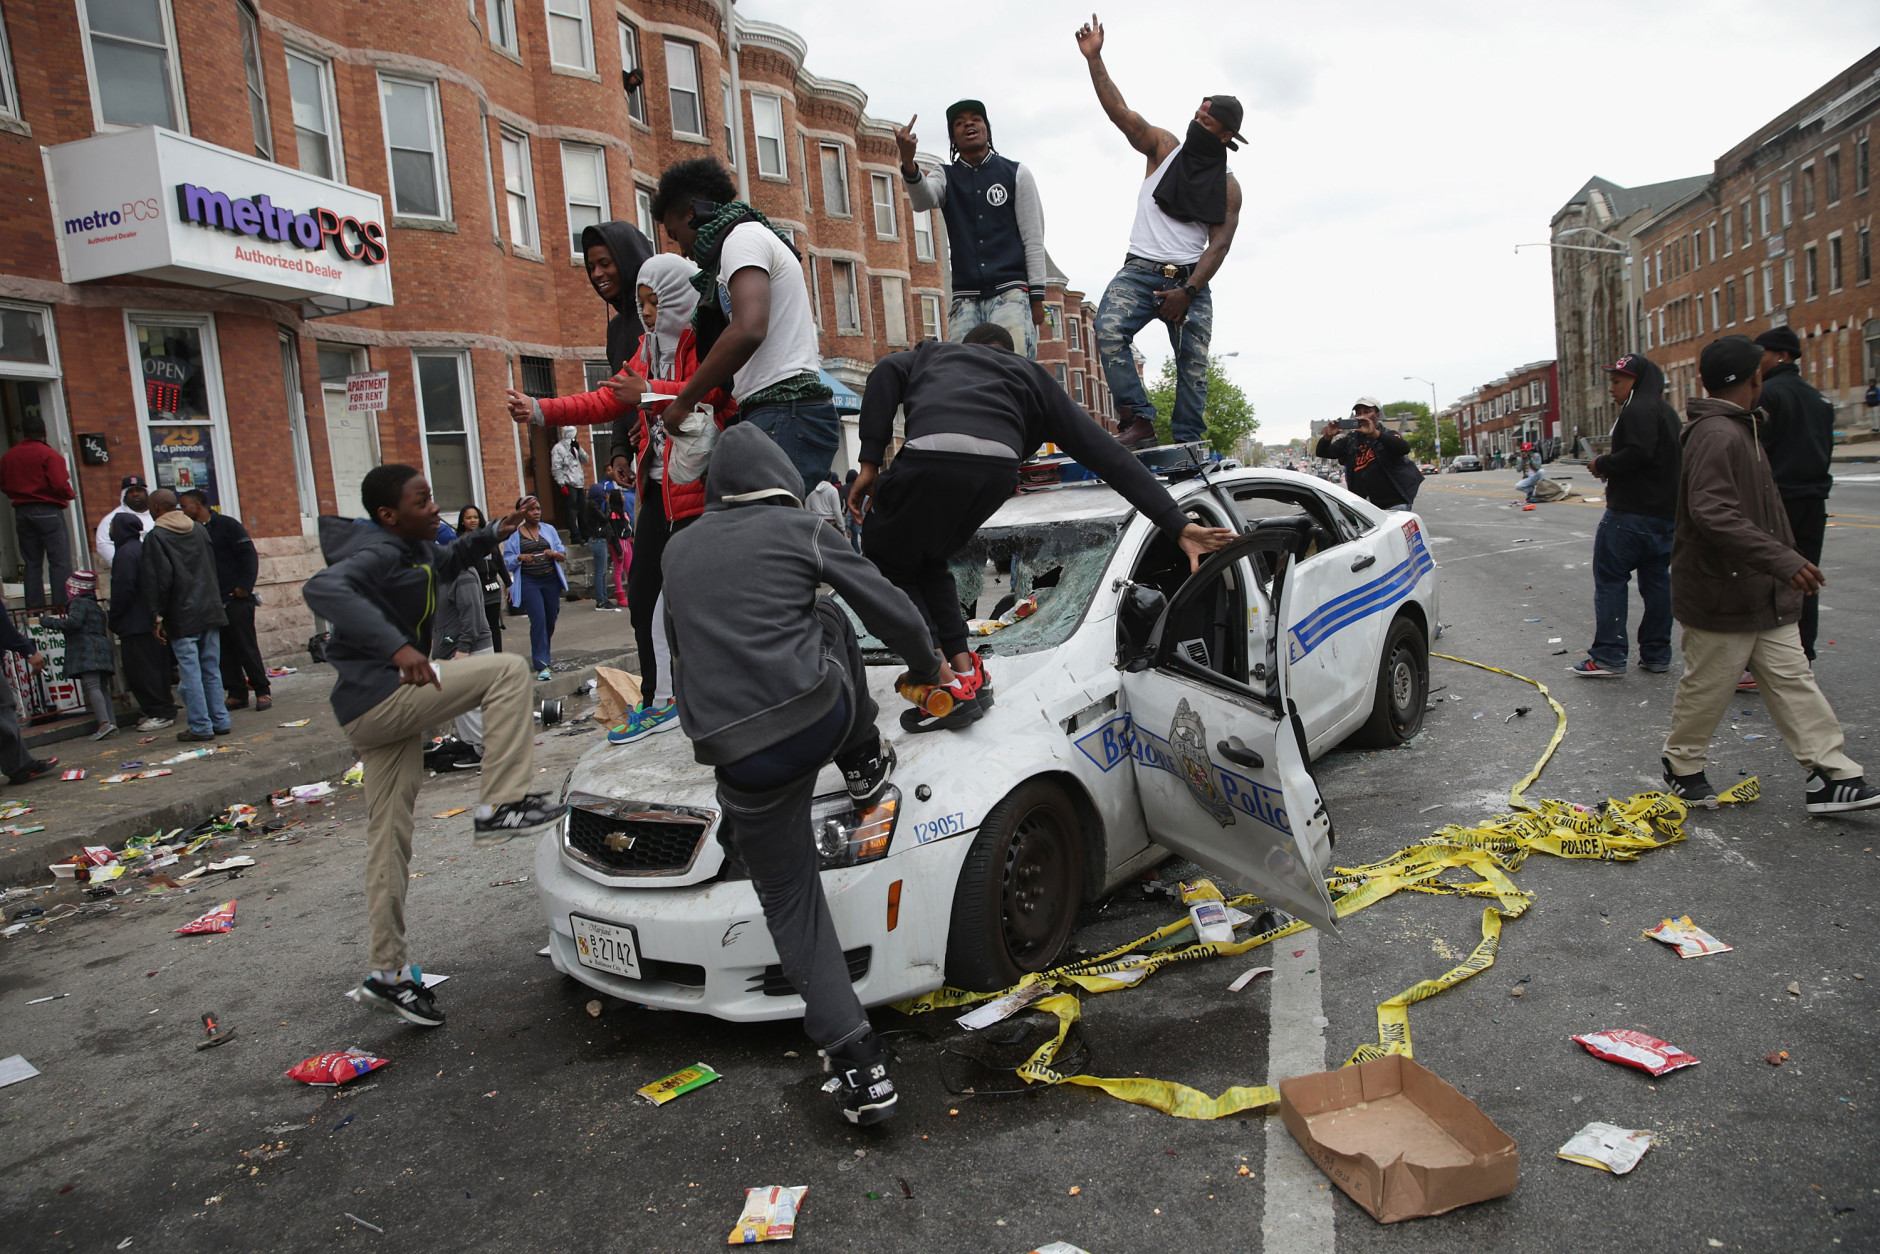 BALTIMORE, MD - APRIL 27: Demonstrators climb on a destroyed Baltimore Police car in the street near the corner of Pennsylvania and North avenues during violent protests following the funeral of Freddie Gray April 27, 2015 in Baltimore, Maryland. Gray, 25, who was arrested for possessing a switch blade knife April 12 outside the Gilmor Homes housing project on Baltimore's west side. According to his attorney, Gray died a week later in the hospital from a severe spinal cord injury he received while in police custody. (Photo by Chip Somodevilla/Getty Images)